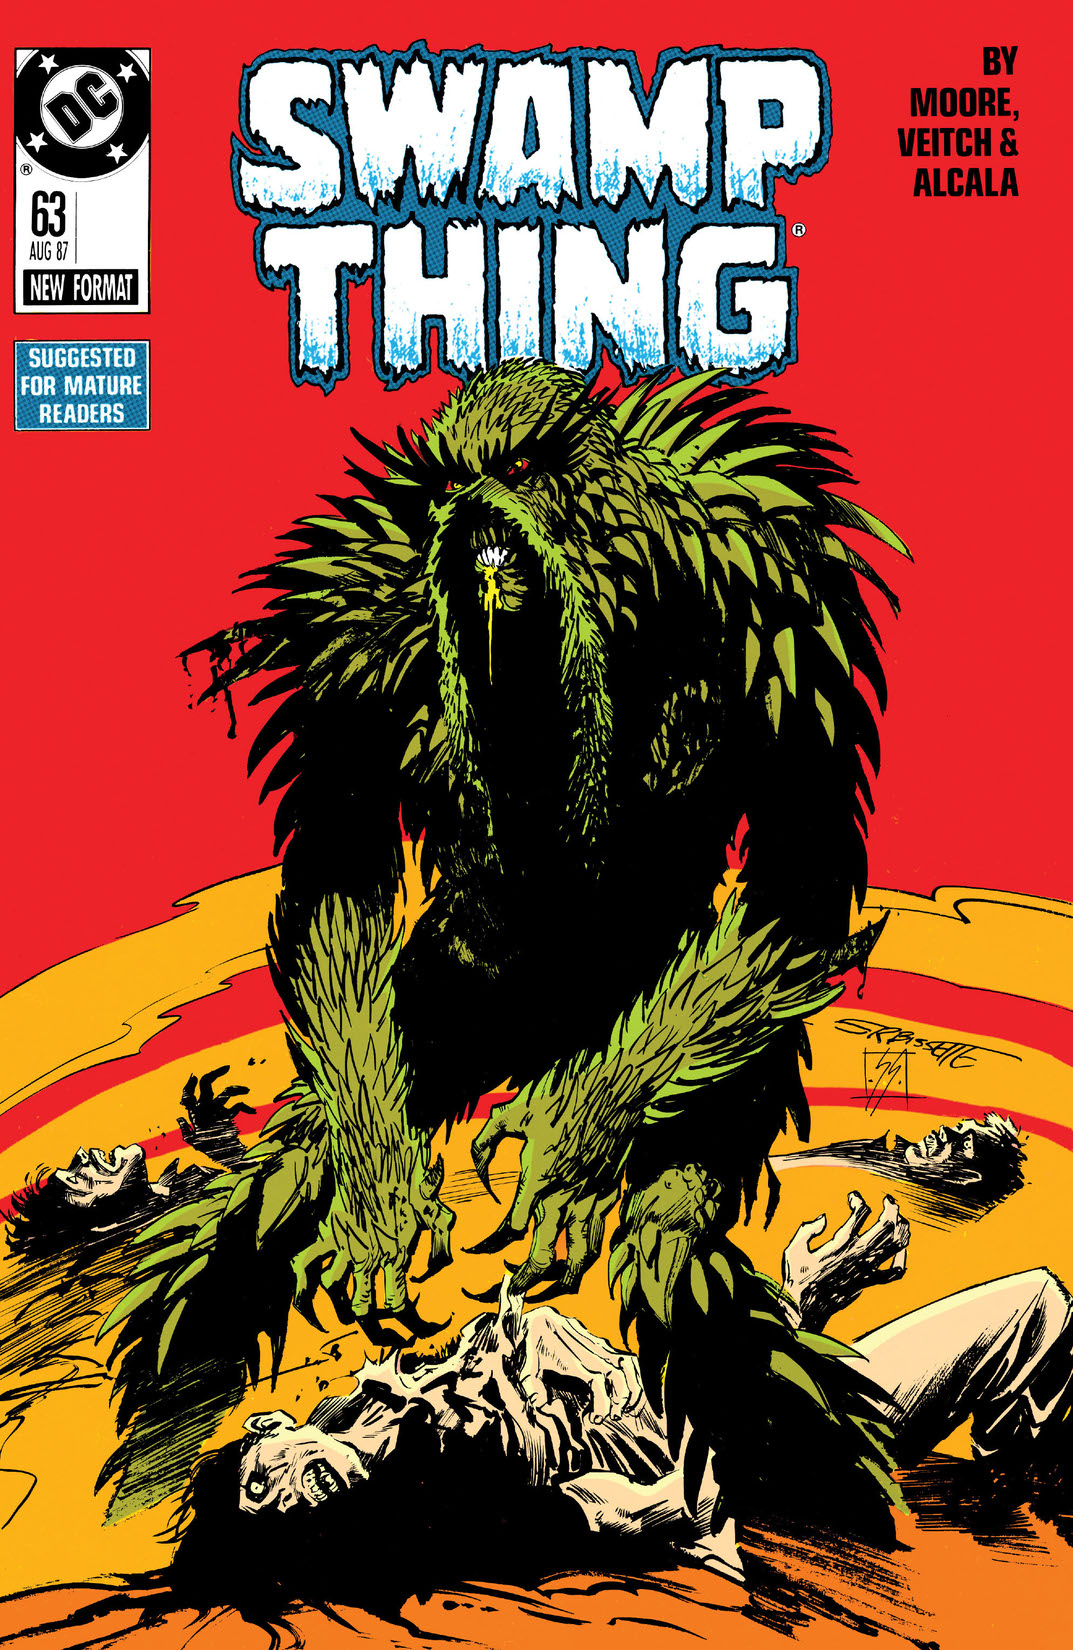 Swamp Thing (1985-) #63 preview images